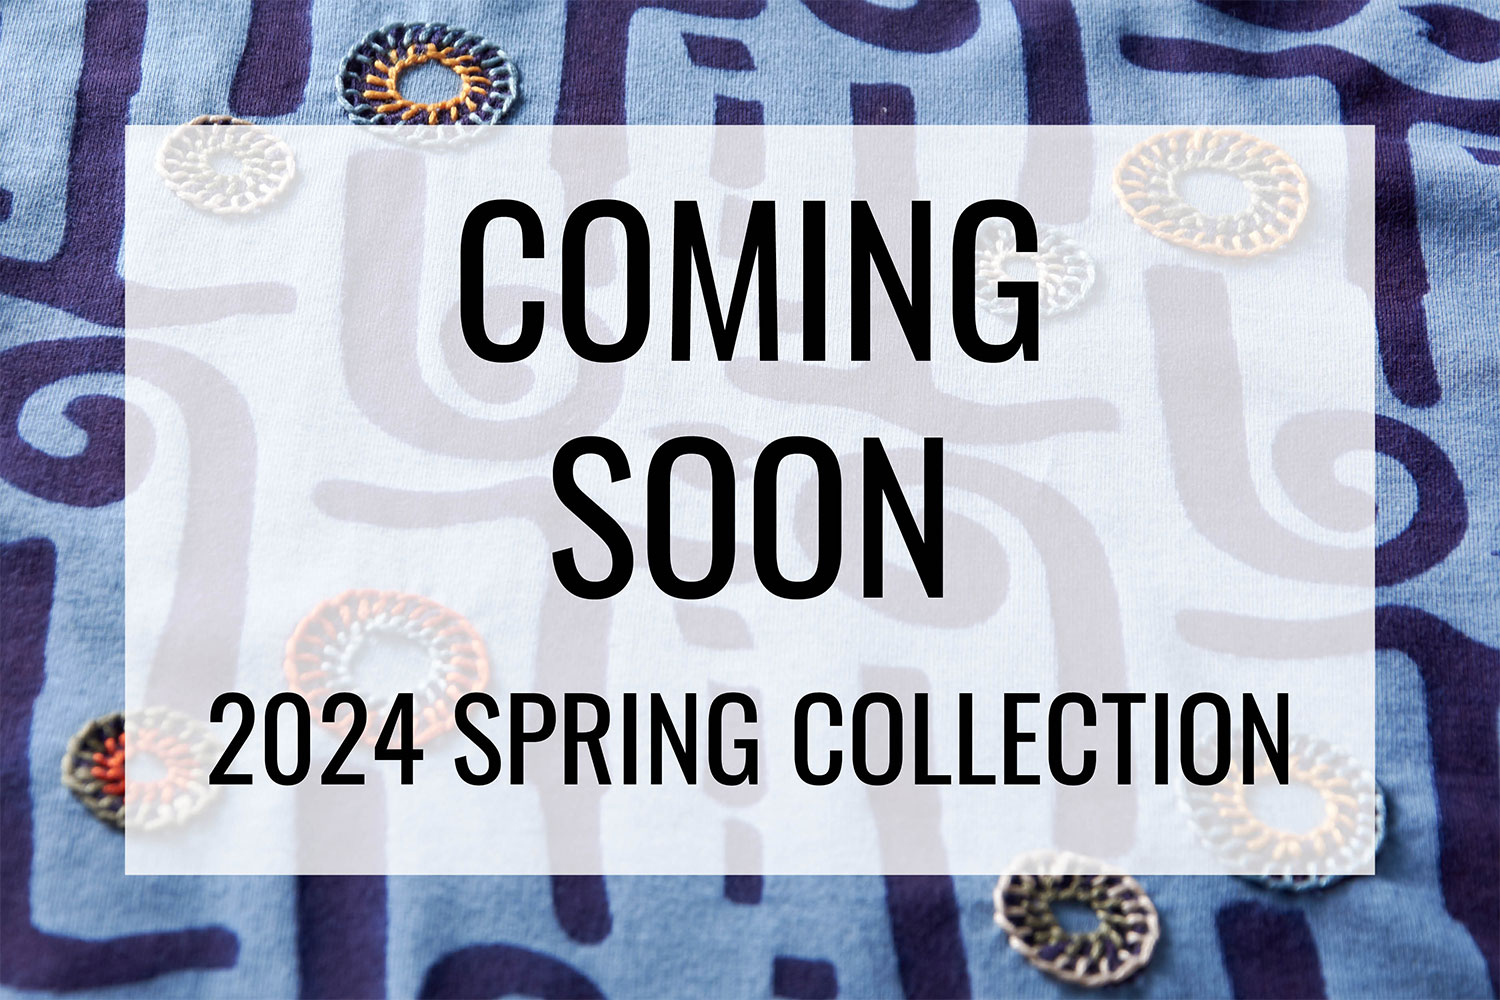 COMING SOON 2024 SPRING COLLECTION 